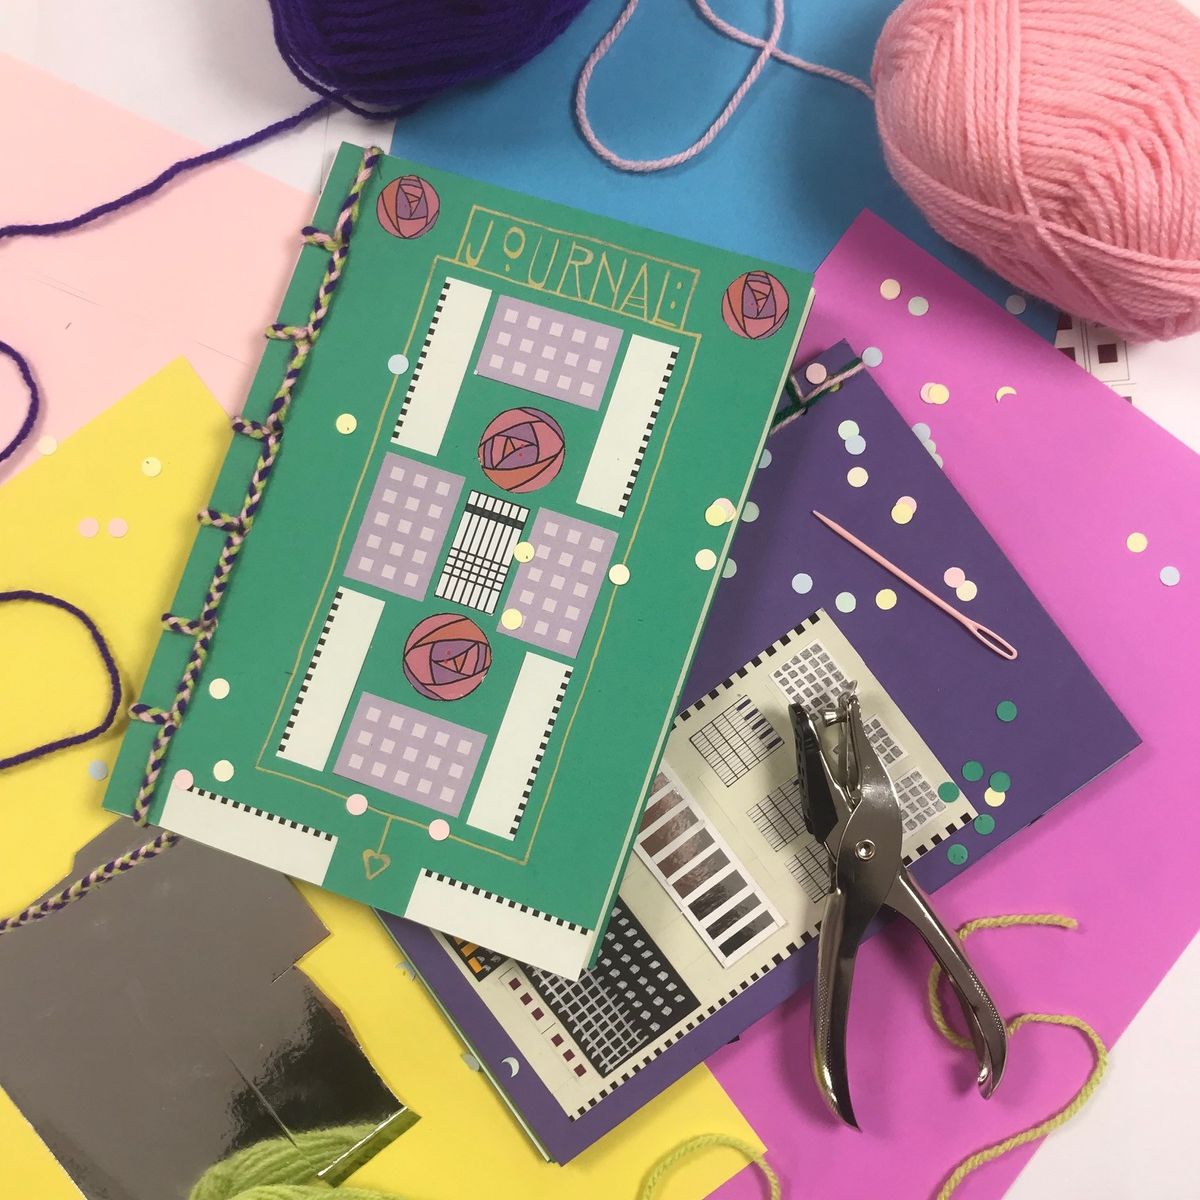 Summer Holiday Family Activity: Make a Hand Bound Journal